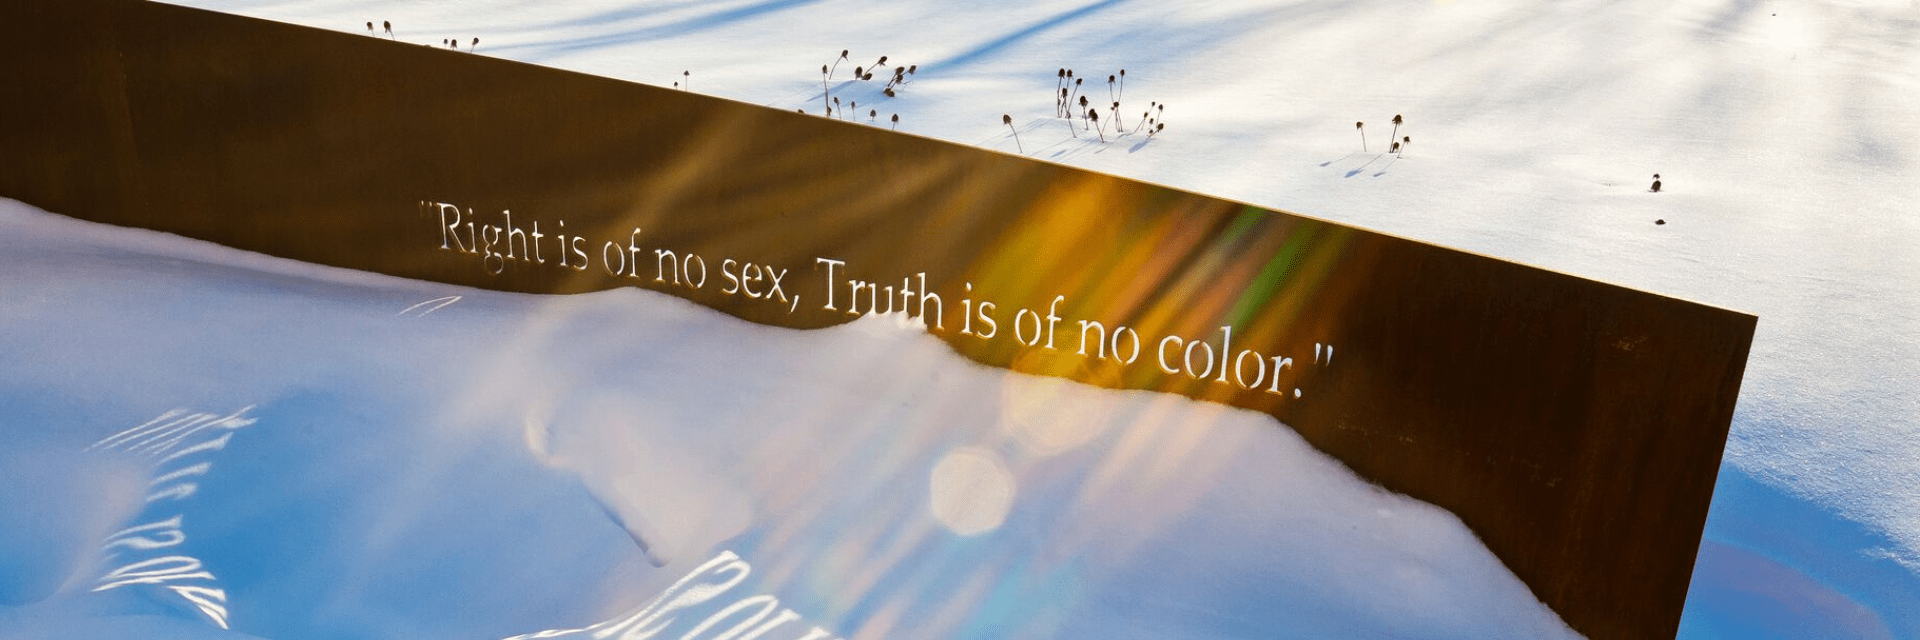 Sculpture with text, "Right is of no sex. Truth is of no color."